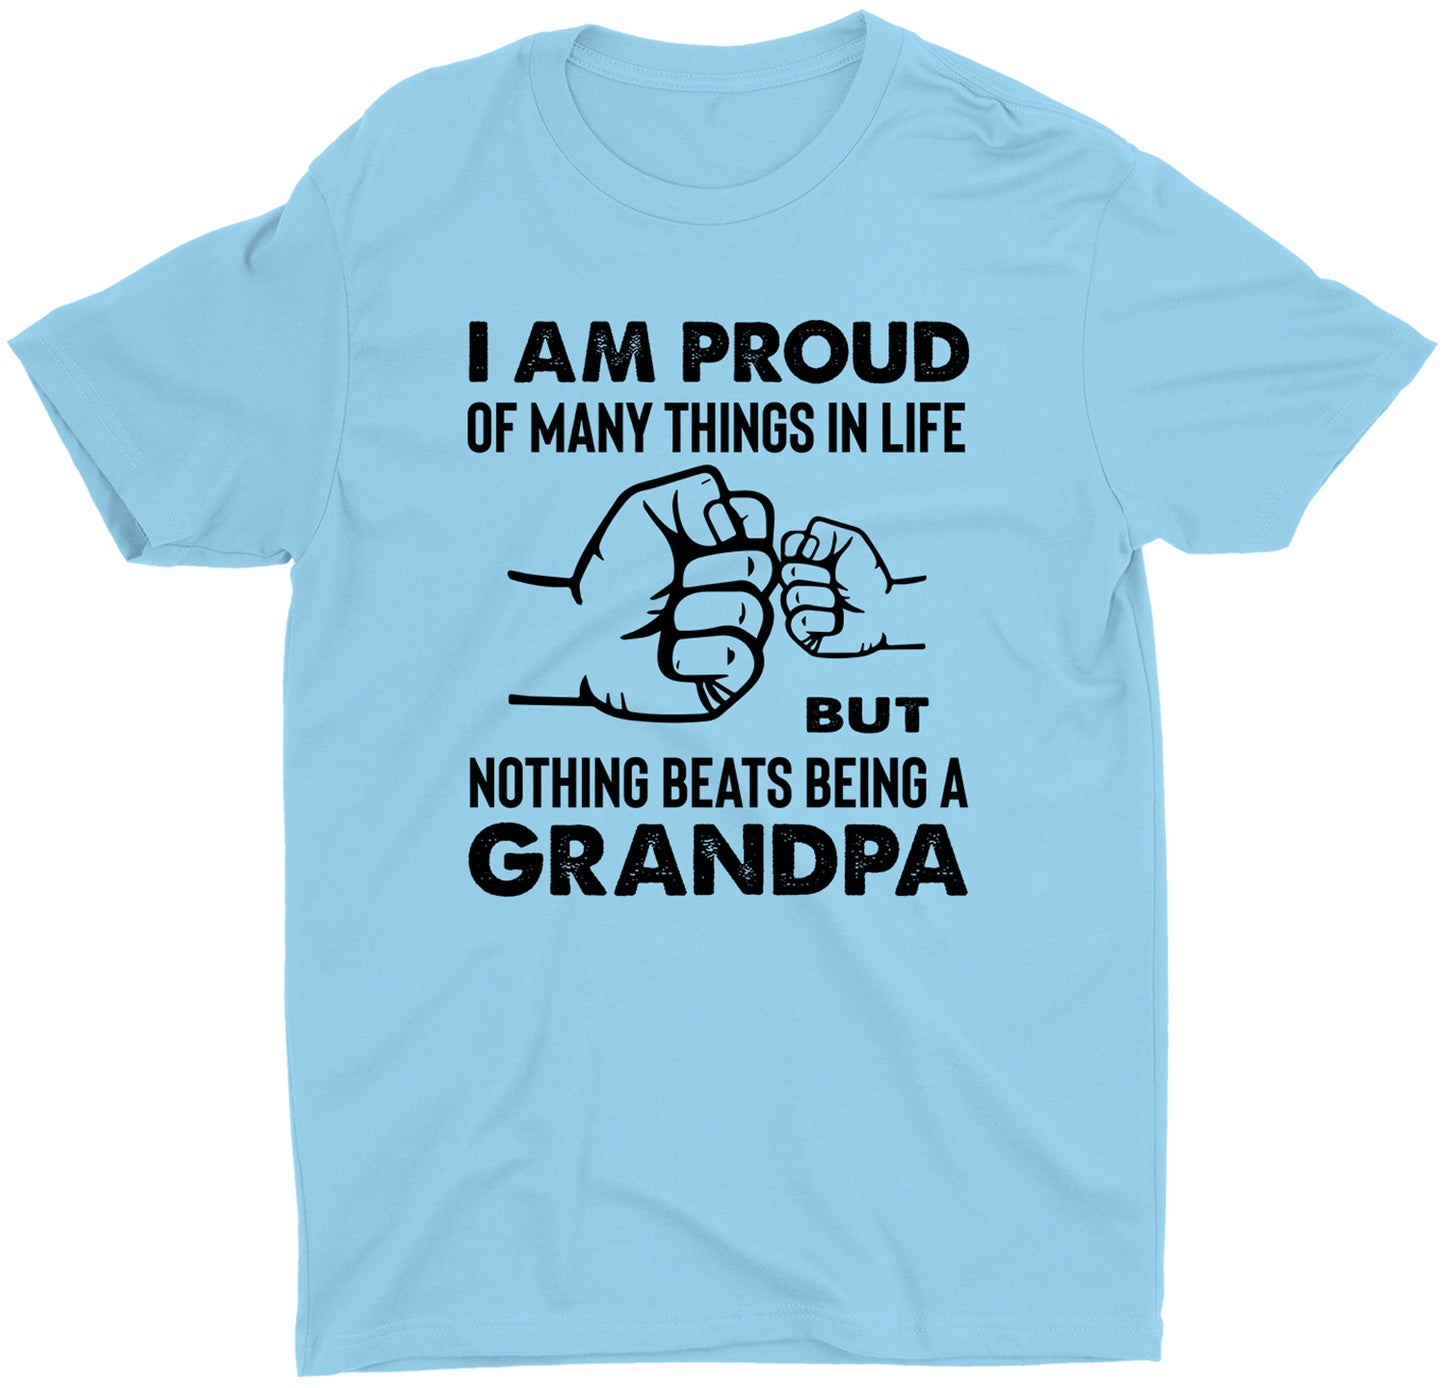 I Am Proud of Many Things in Life But Nothing Beats Grandpa T-Shirt